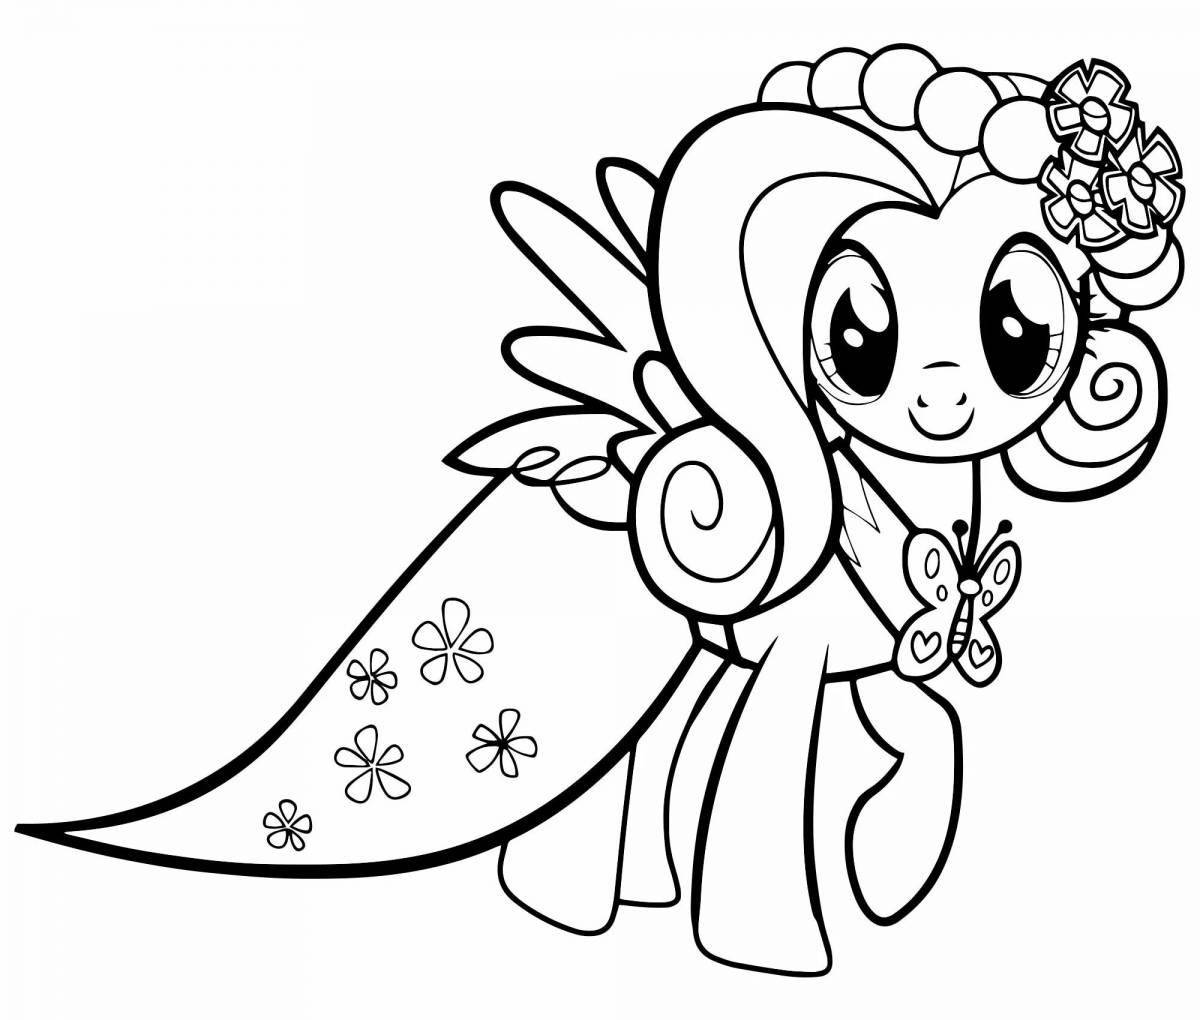 Cute coloring page for pony girls